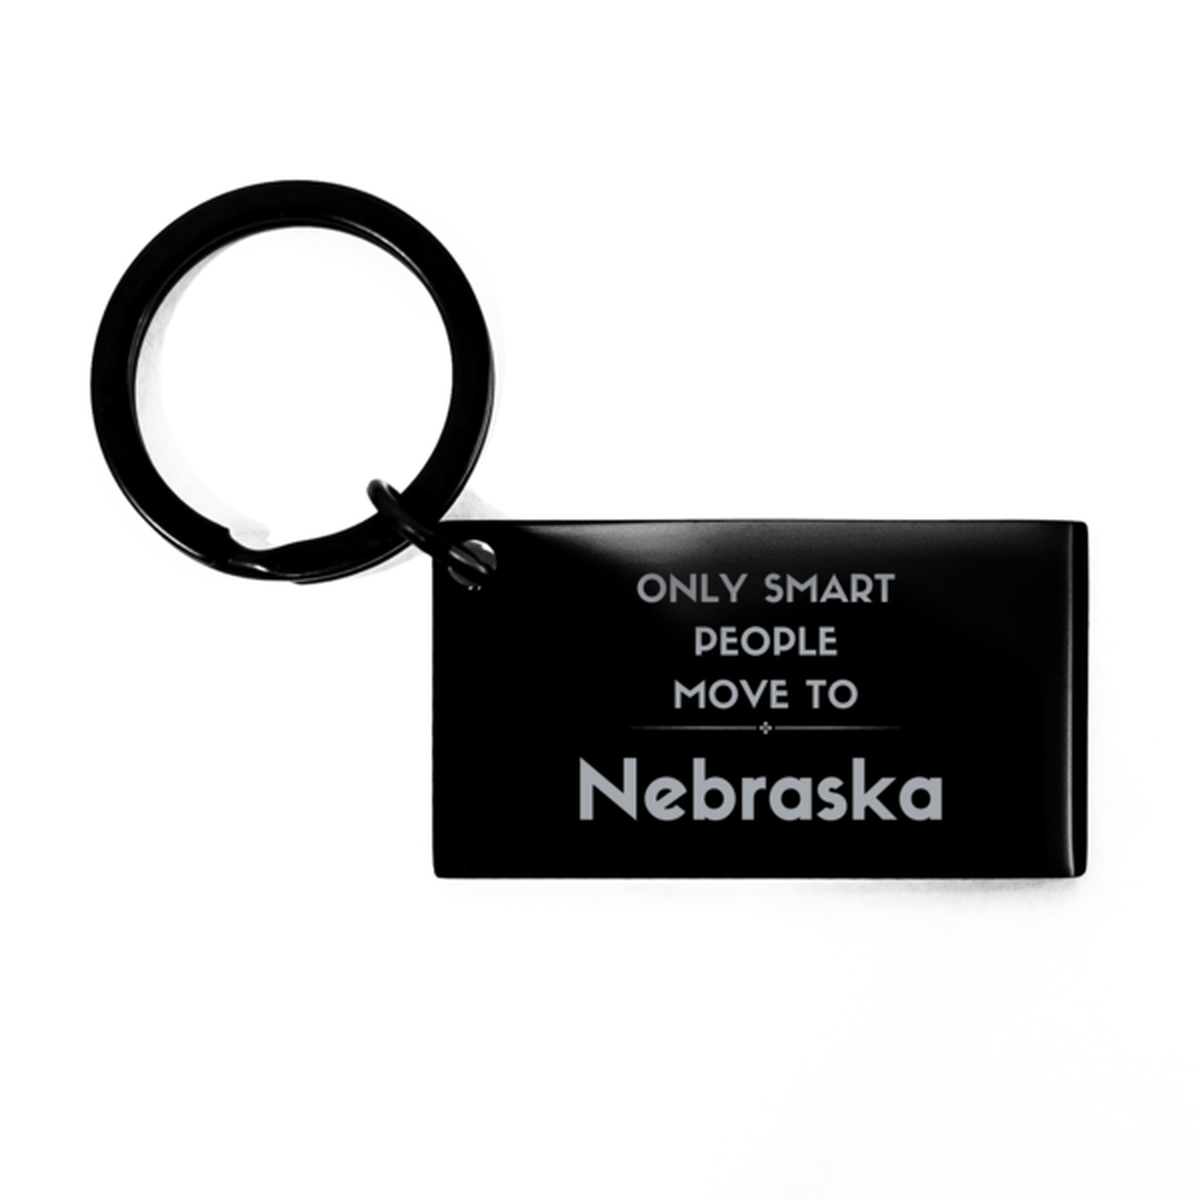 Only smart people move to Nebraska Keychain, Gag Gifts For Nebraska, Move to Nebraska Gifts for Friends Coworker Funny Saying Quote